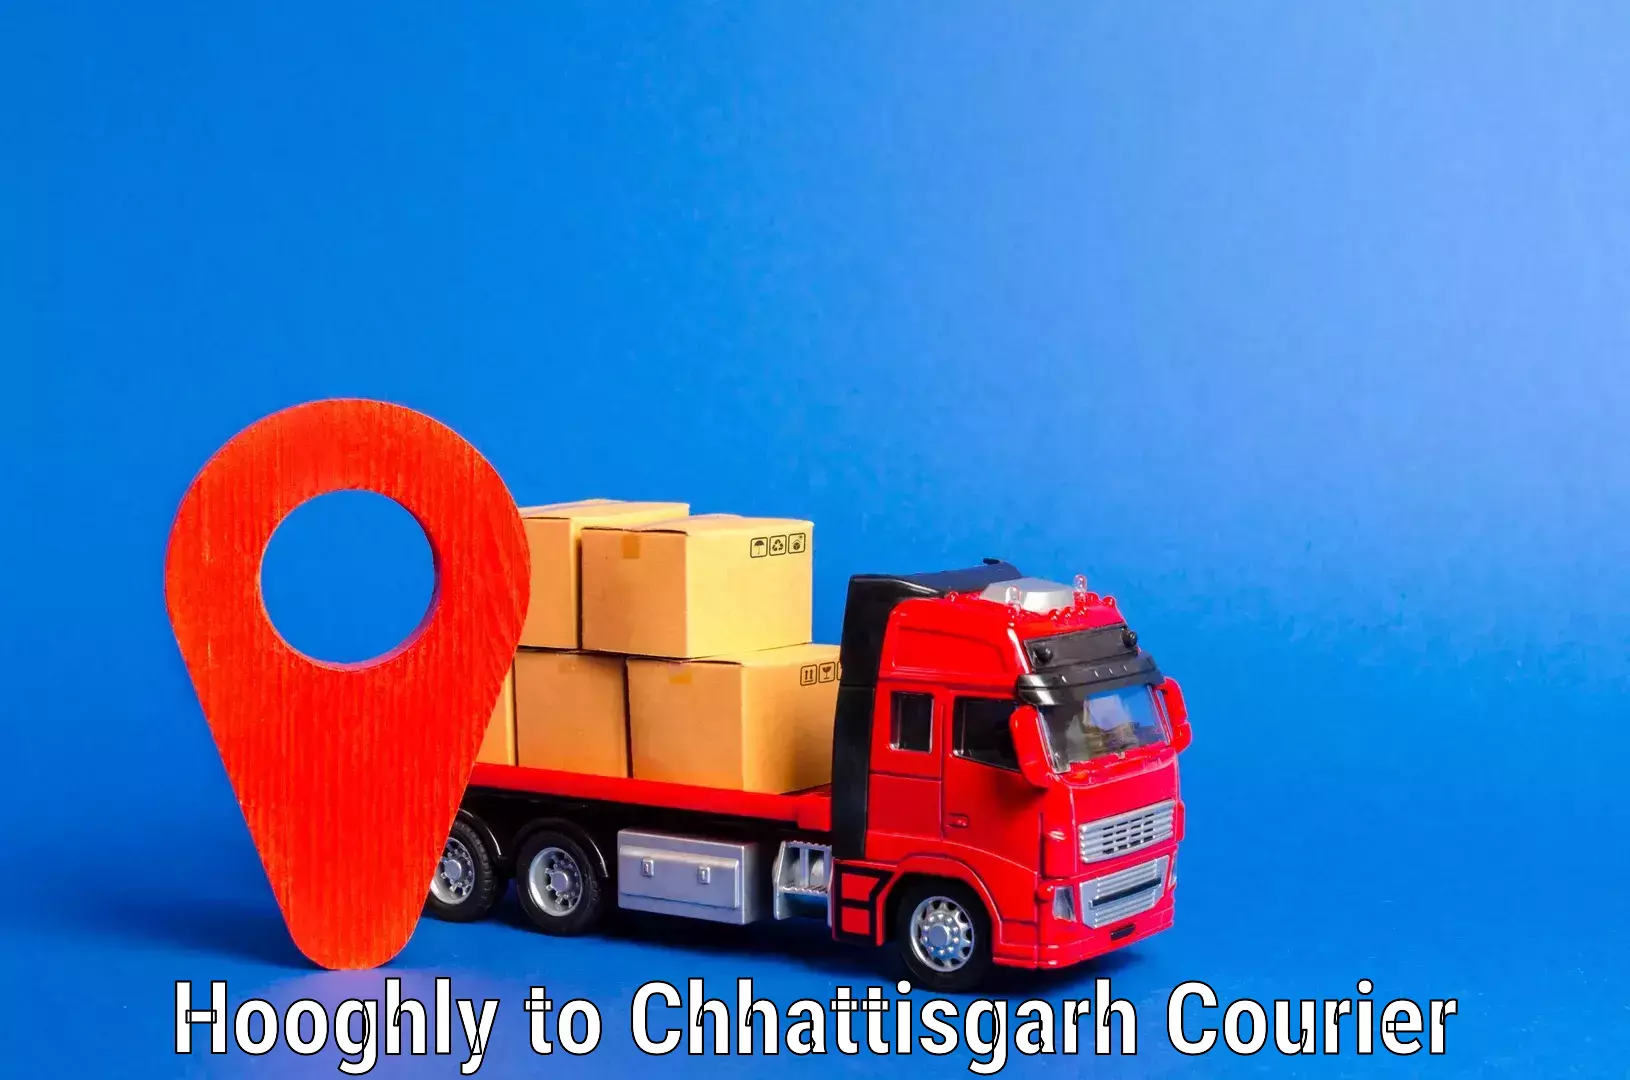 Efficient relocation services Hooghly to Chhattisgarh